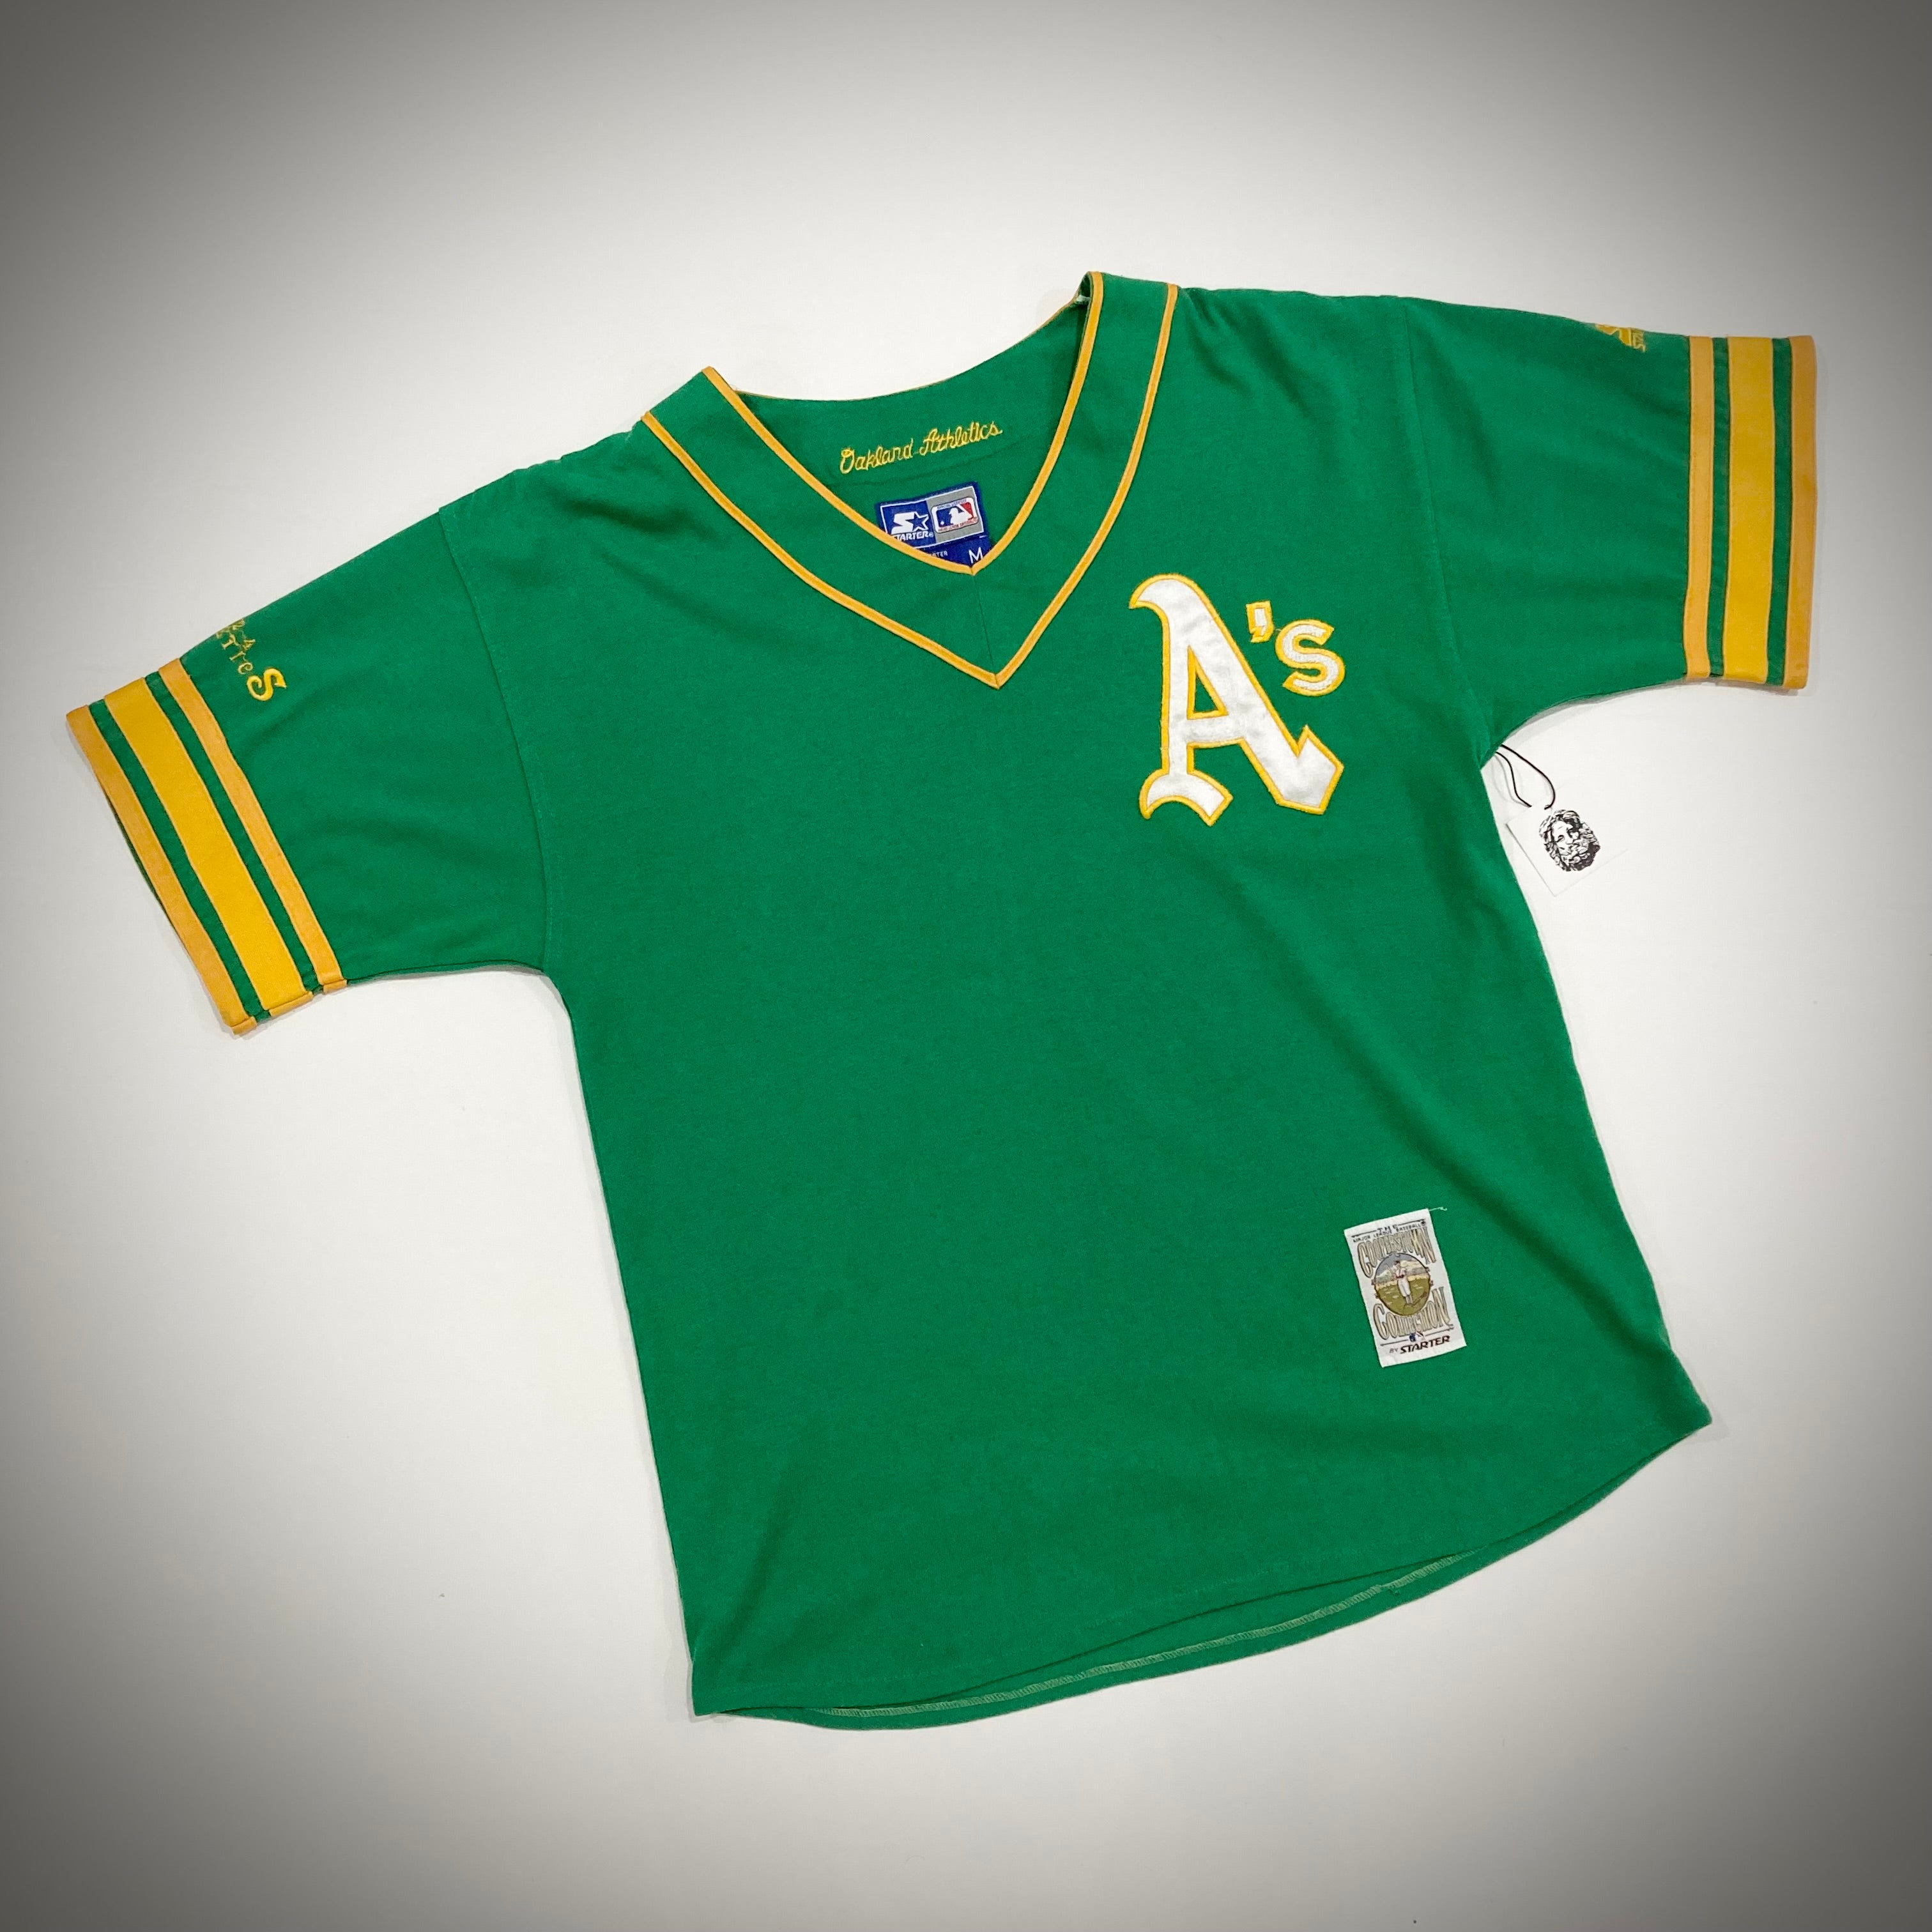 throwback oakland a's jersey